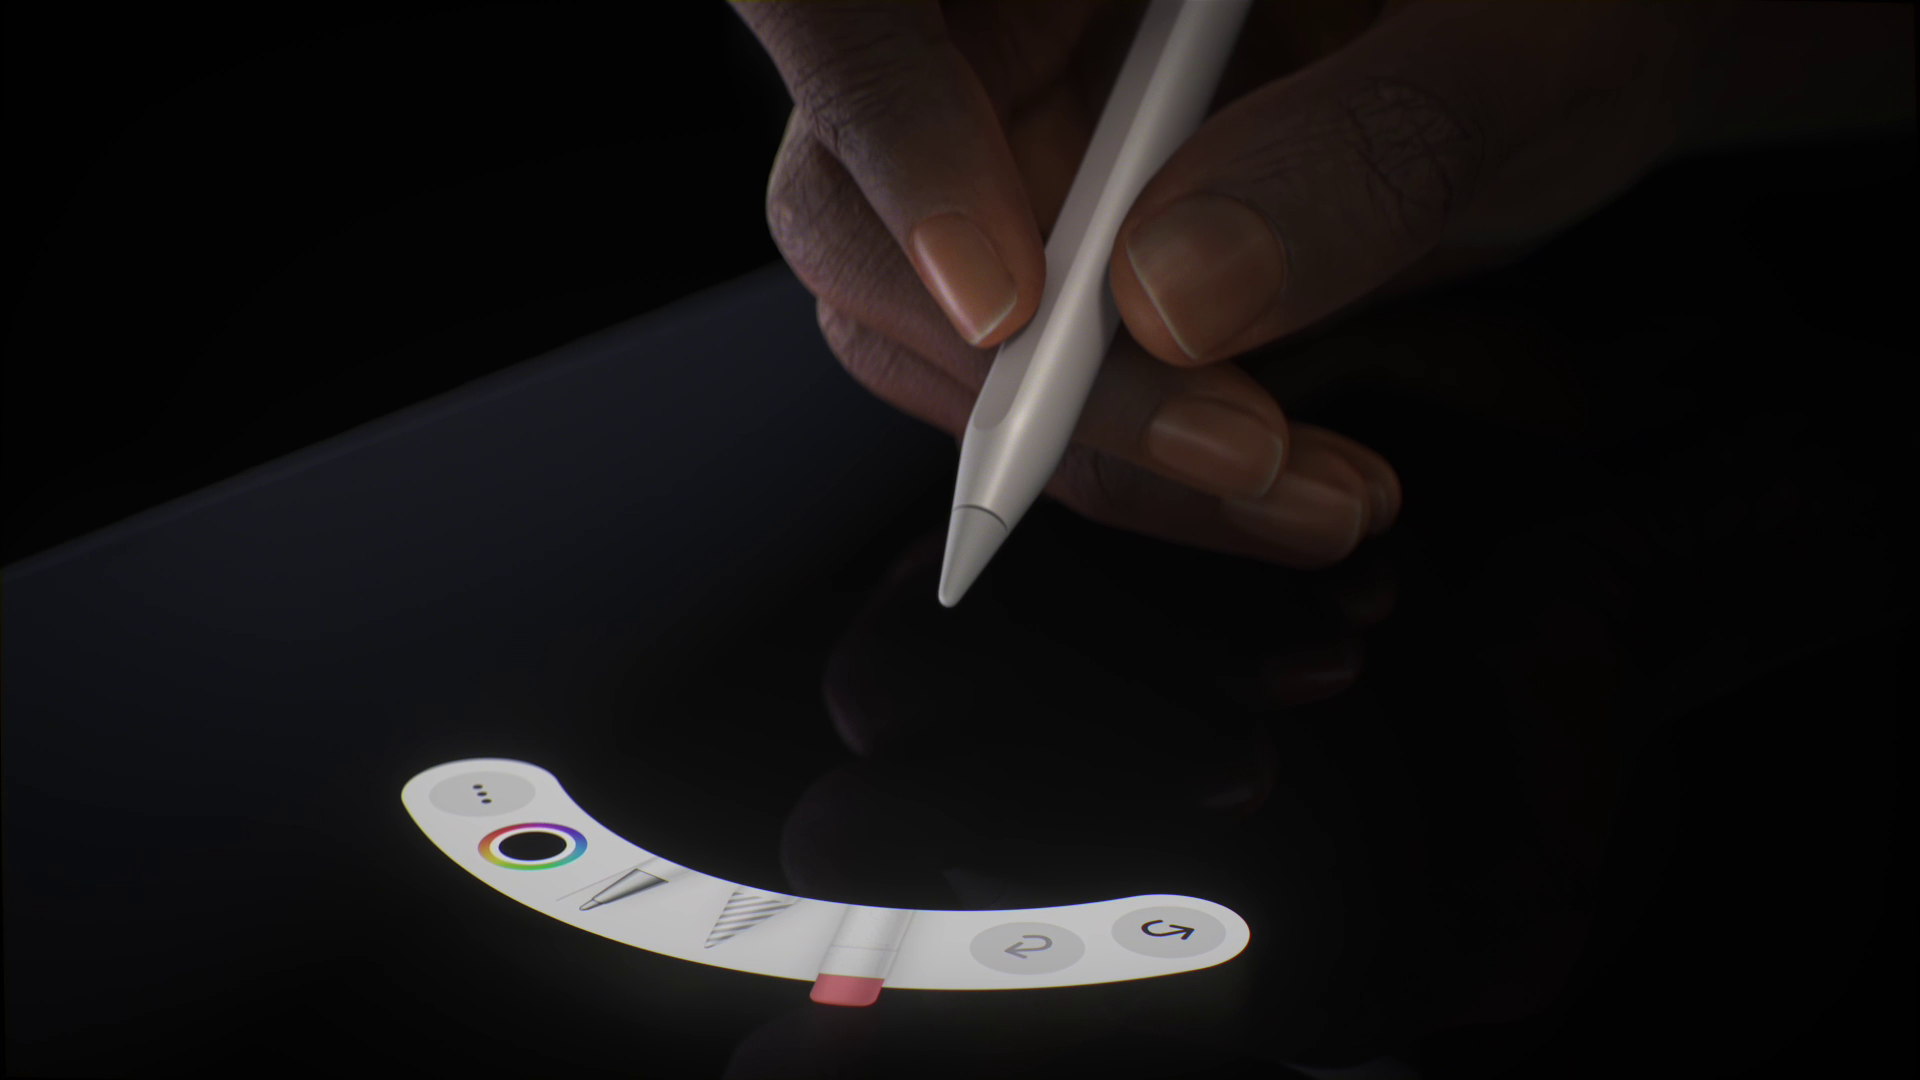 Apple Pencil Pro allows you to squeeze and get a palette for brushes - iPad Air and Pro: 13-inch, with Pencil Pro support. Could the iPad Pro M4 get outshined?